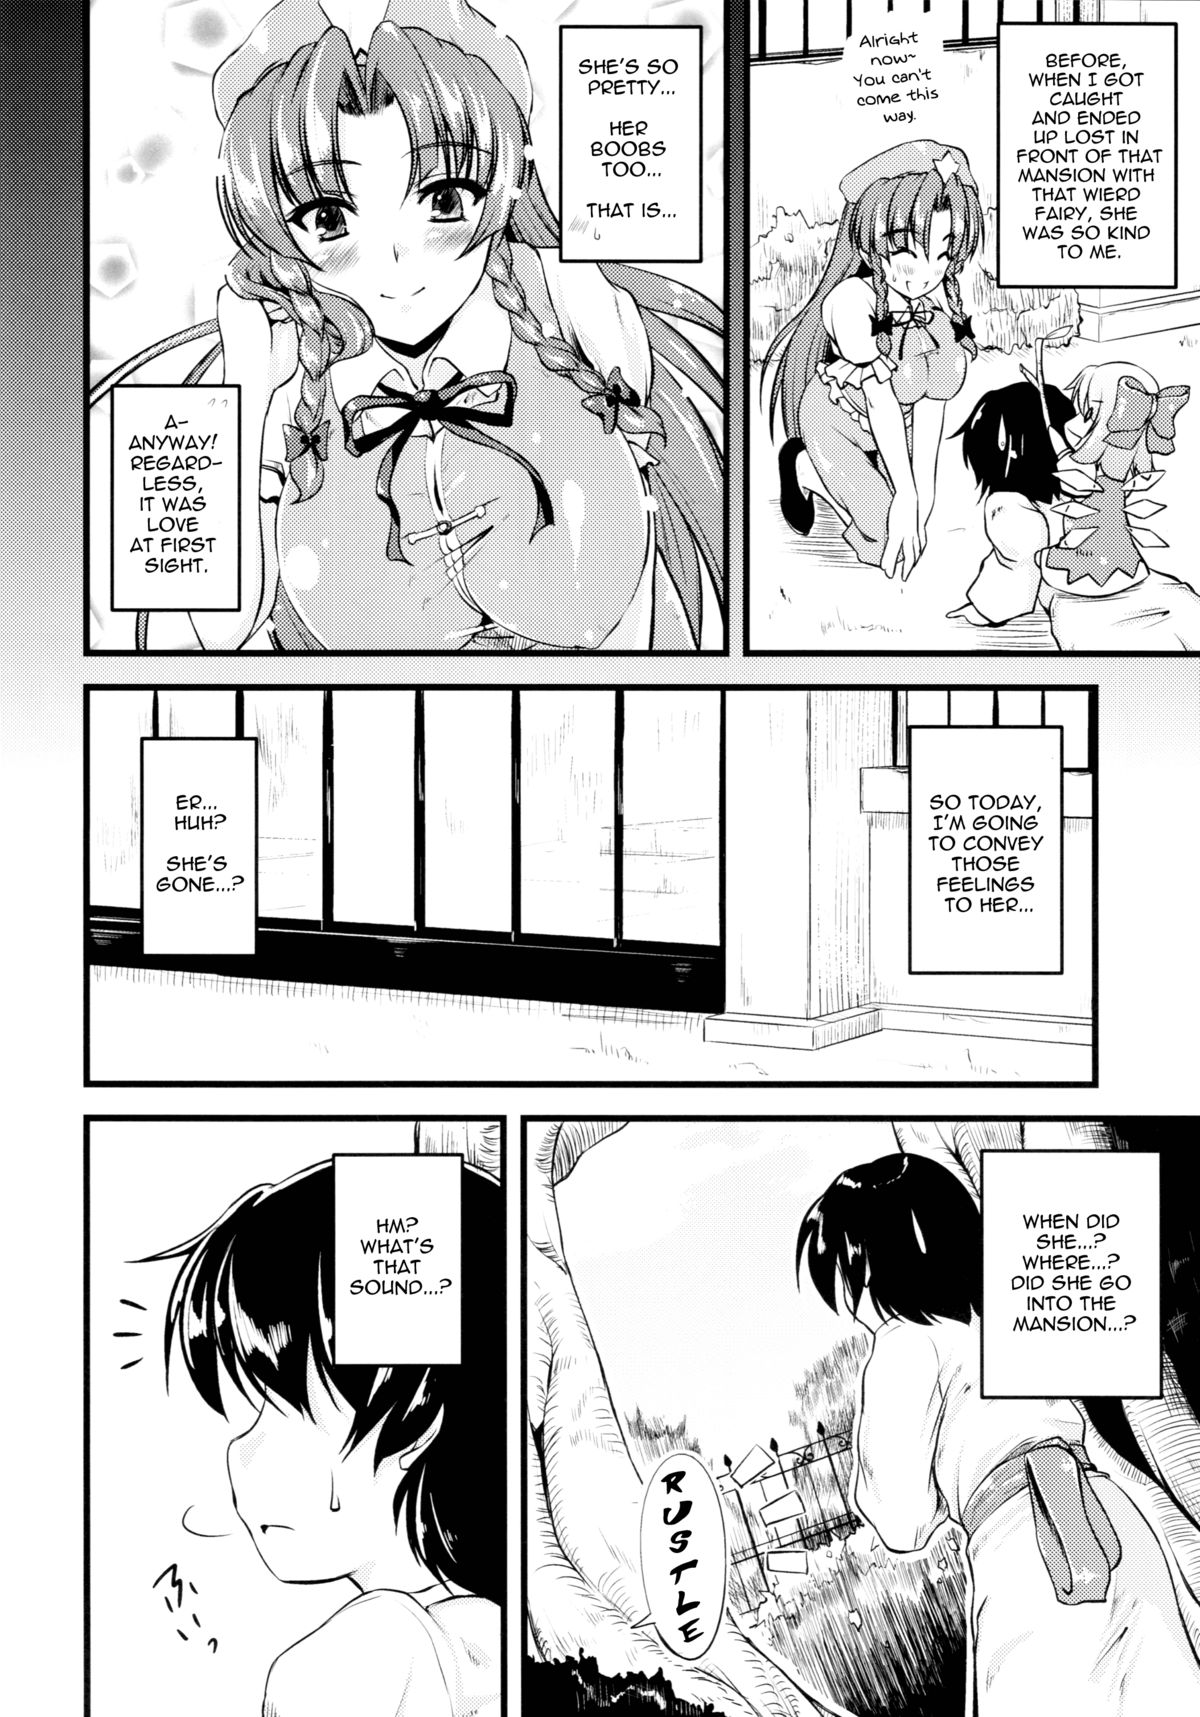 (Reitaisai 8) [from SCRATCH (Johnny)] Monban no Onee-san ga Aite Shite Ageru. | The Gatekeeper Lady is my Partner (Touhou Project) [English] [UMAD] page 6 full